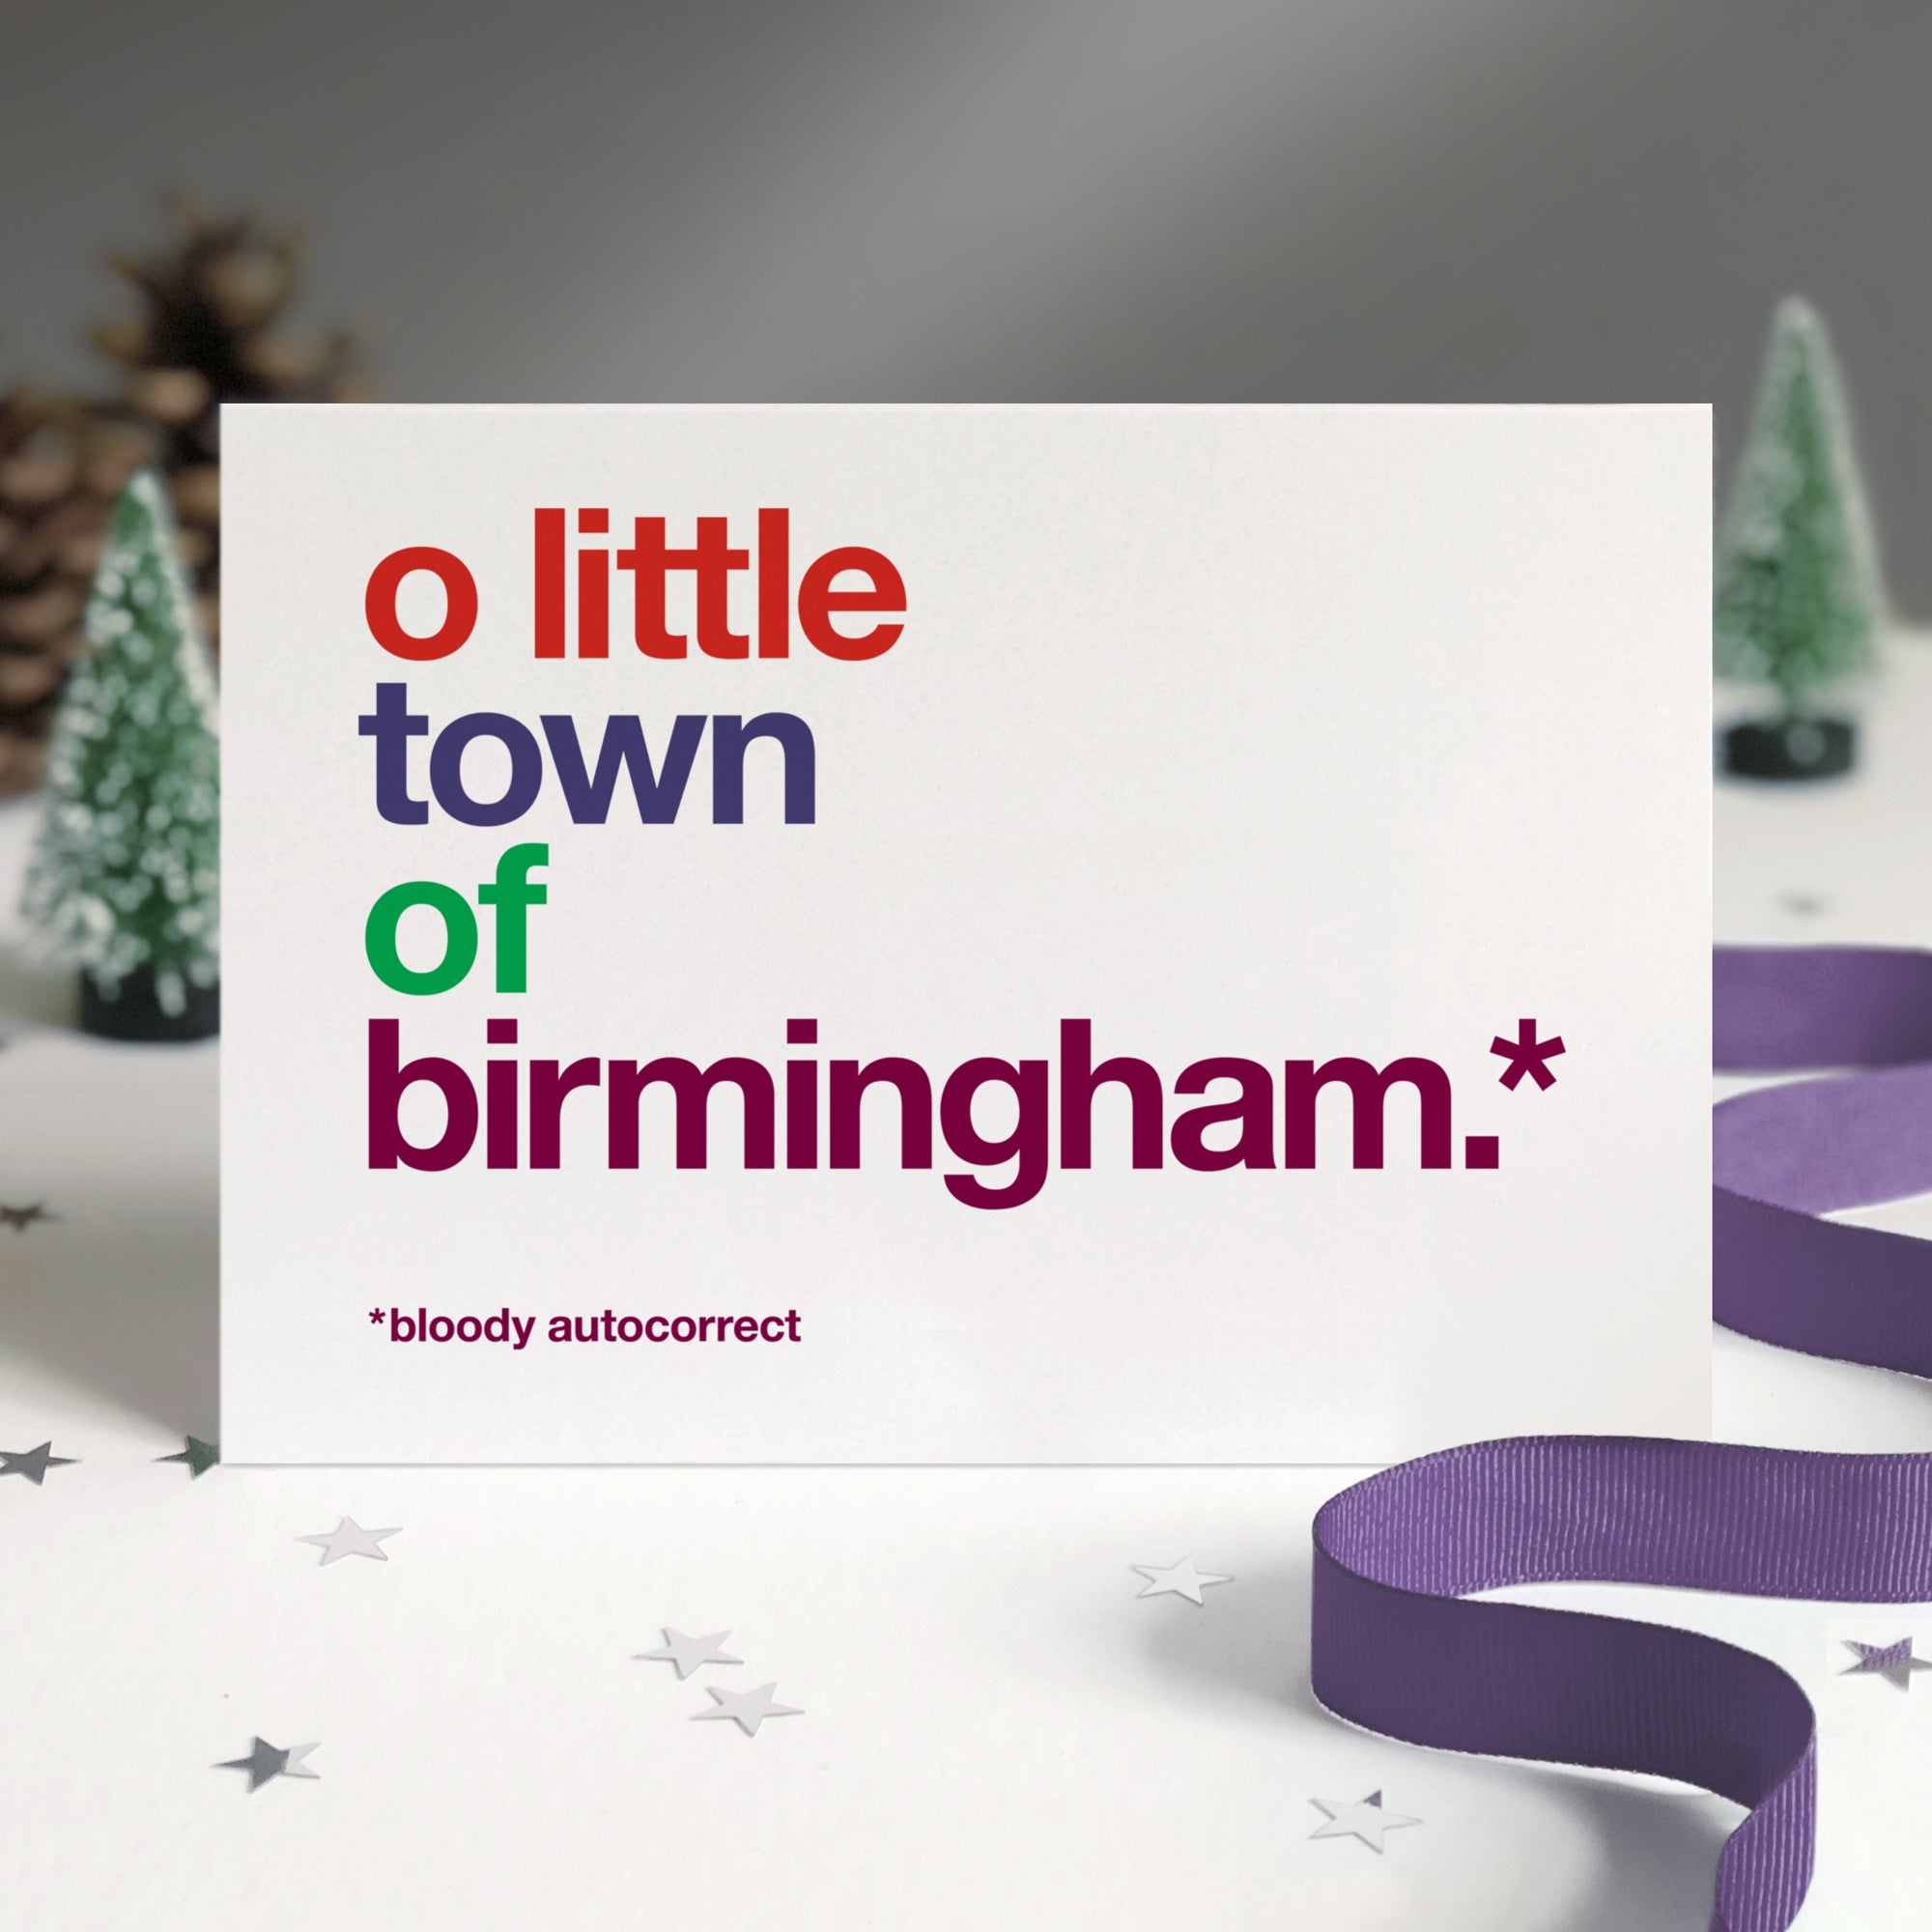 Funny christmas card autocorrected to 'o little town of birmingham'.